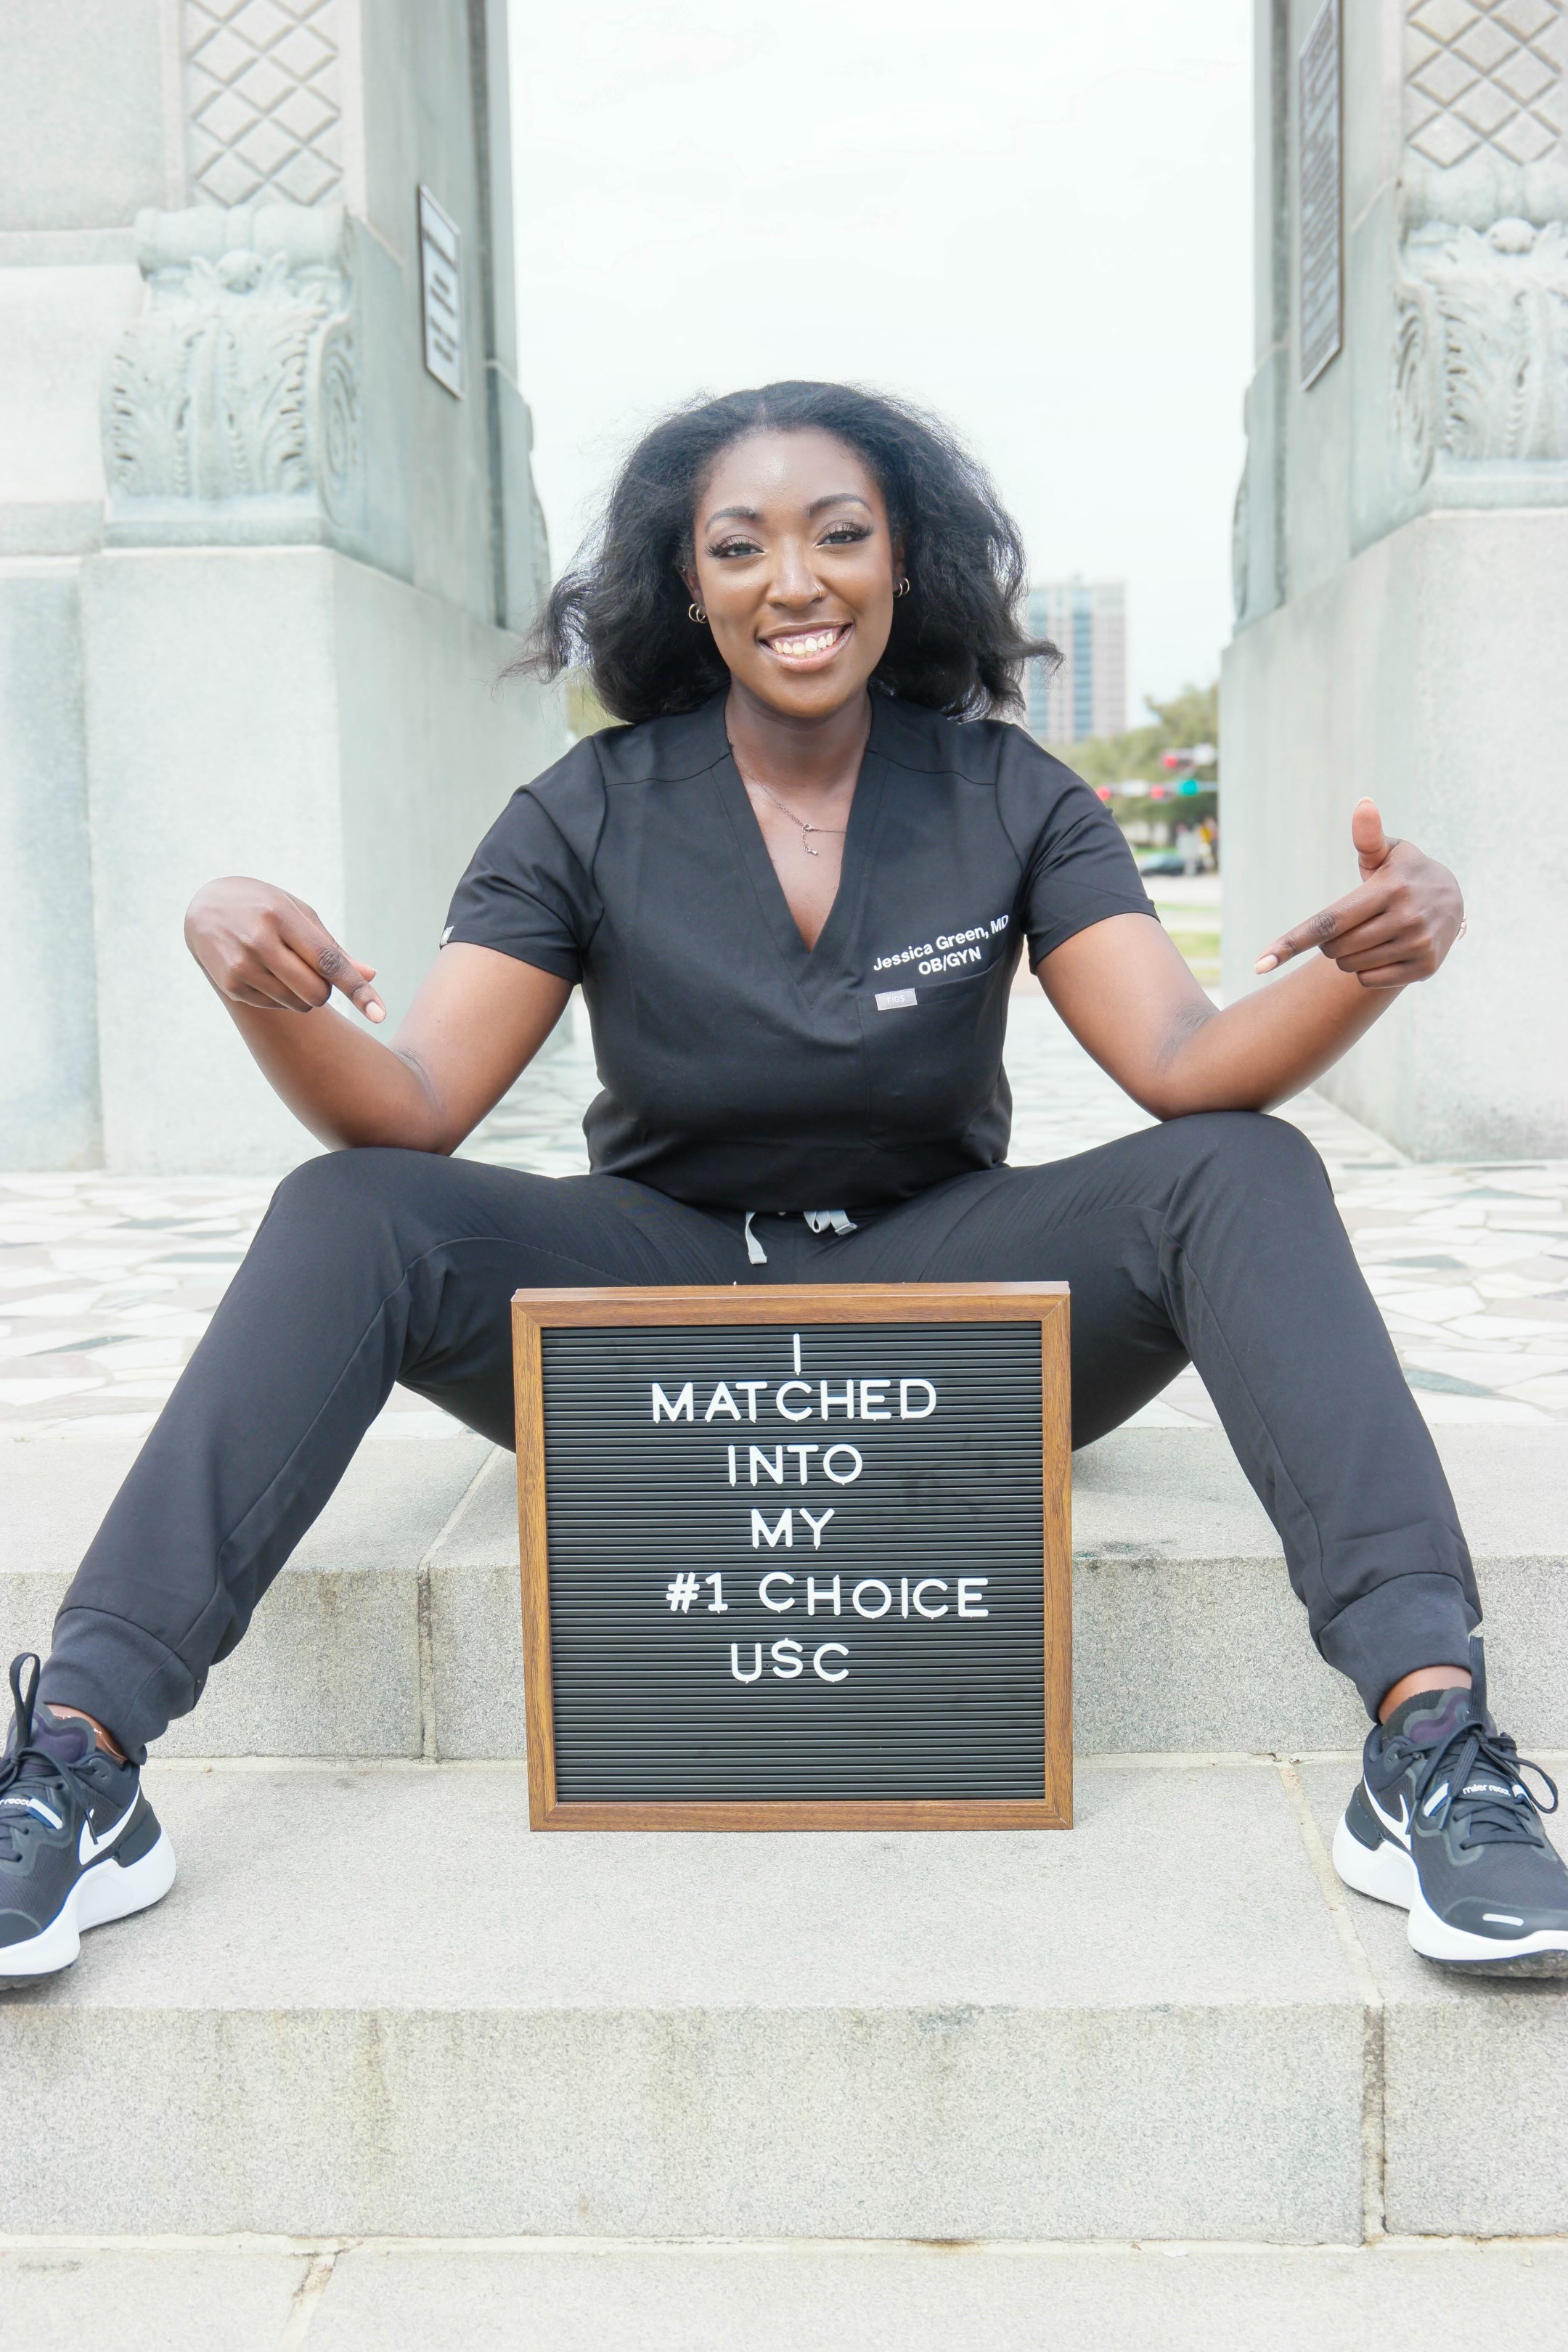 Jessica Green matched with the OBGYN residency program at the University of Southern California. (Photo by Jessica Green)